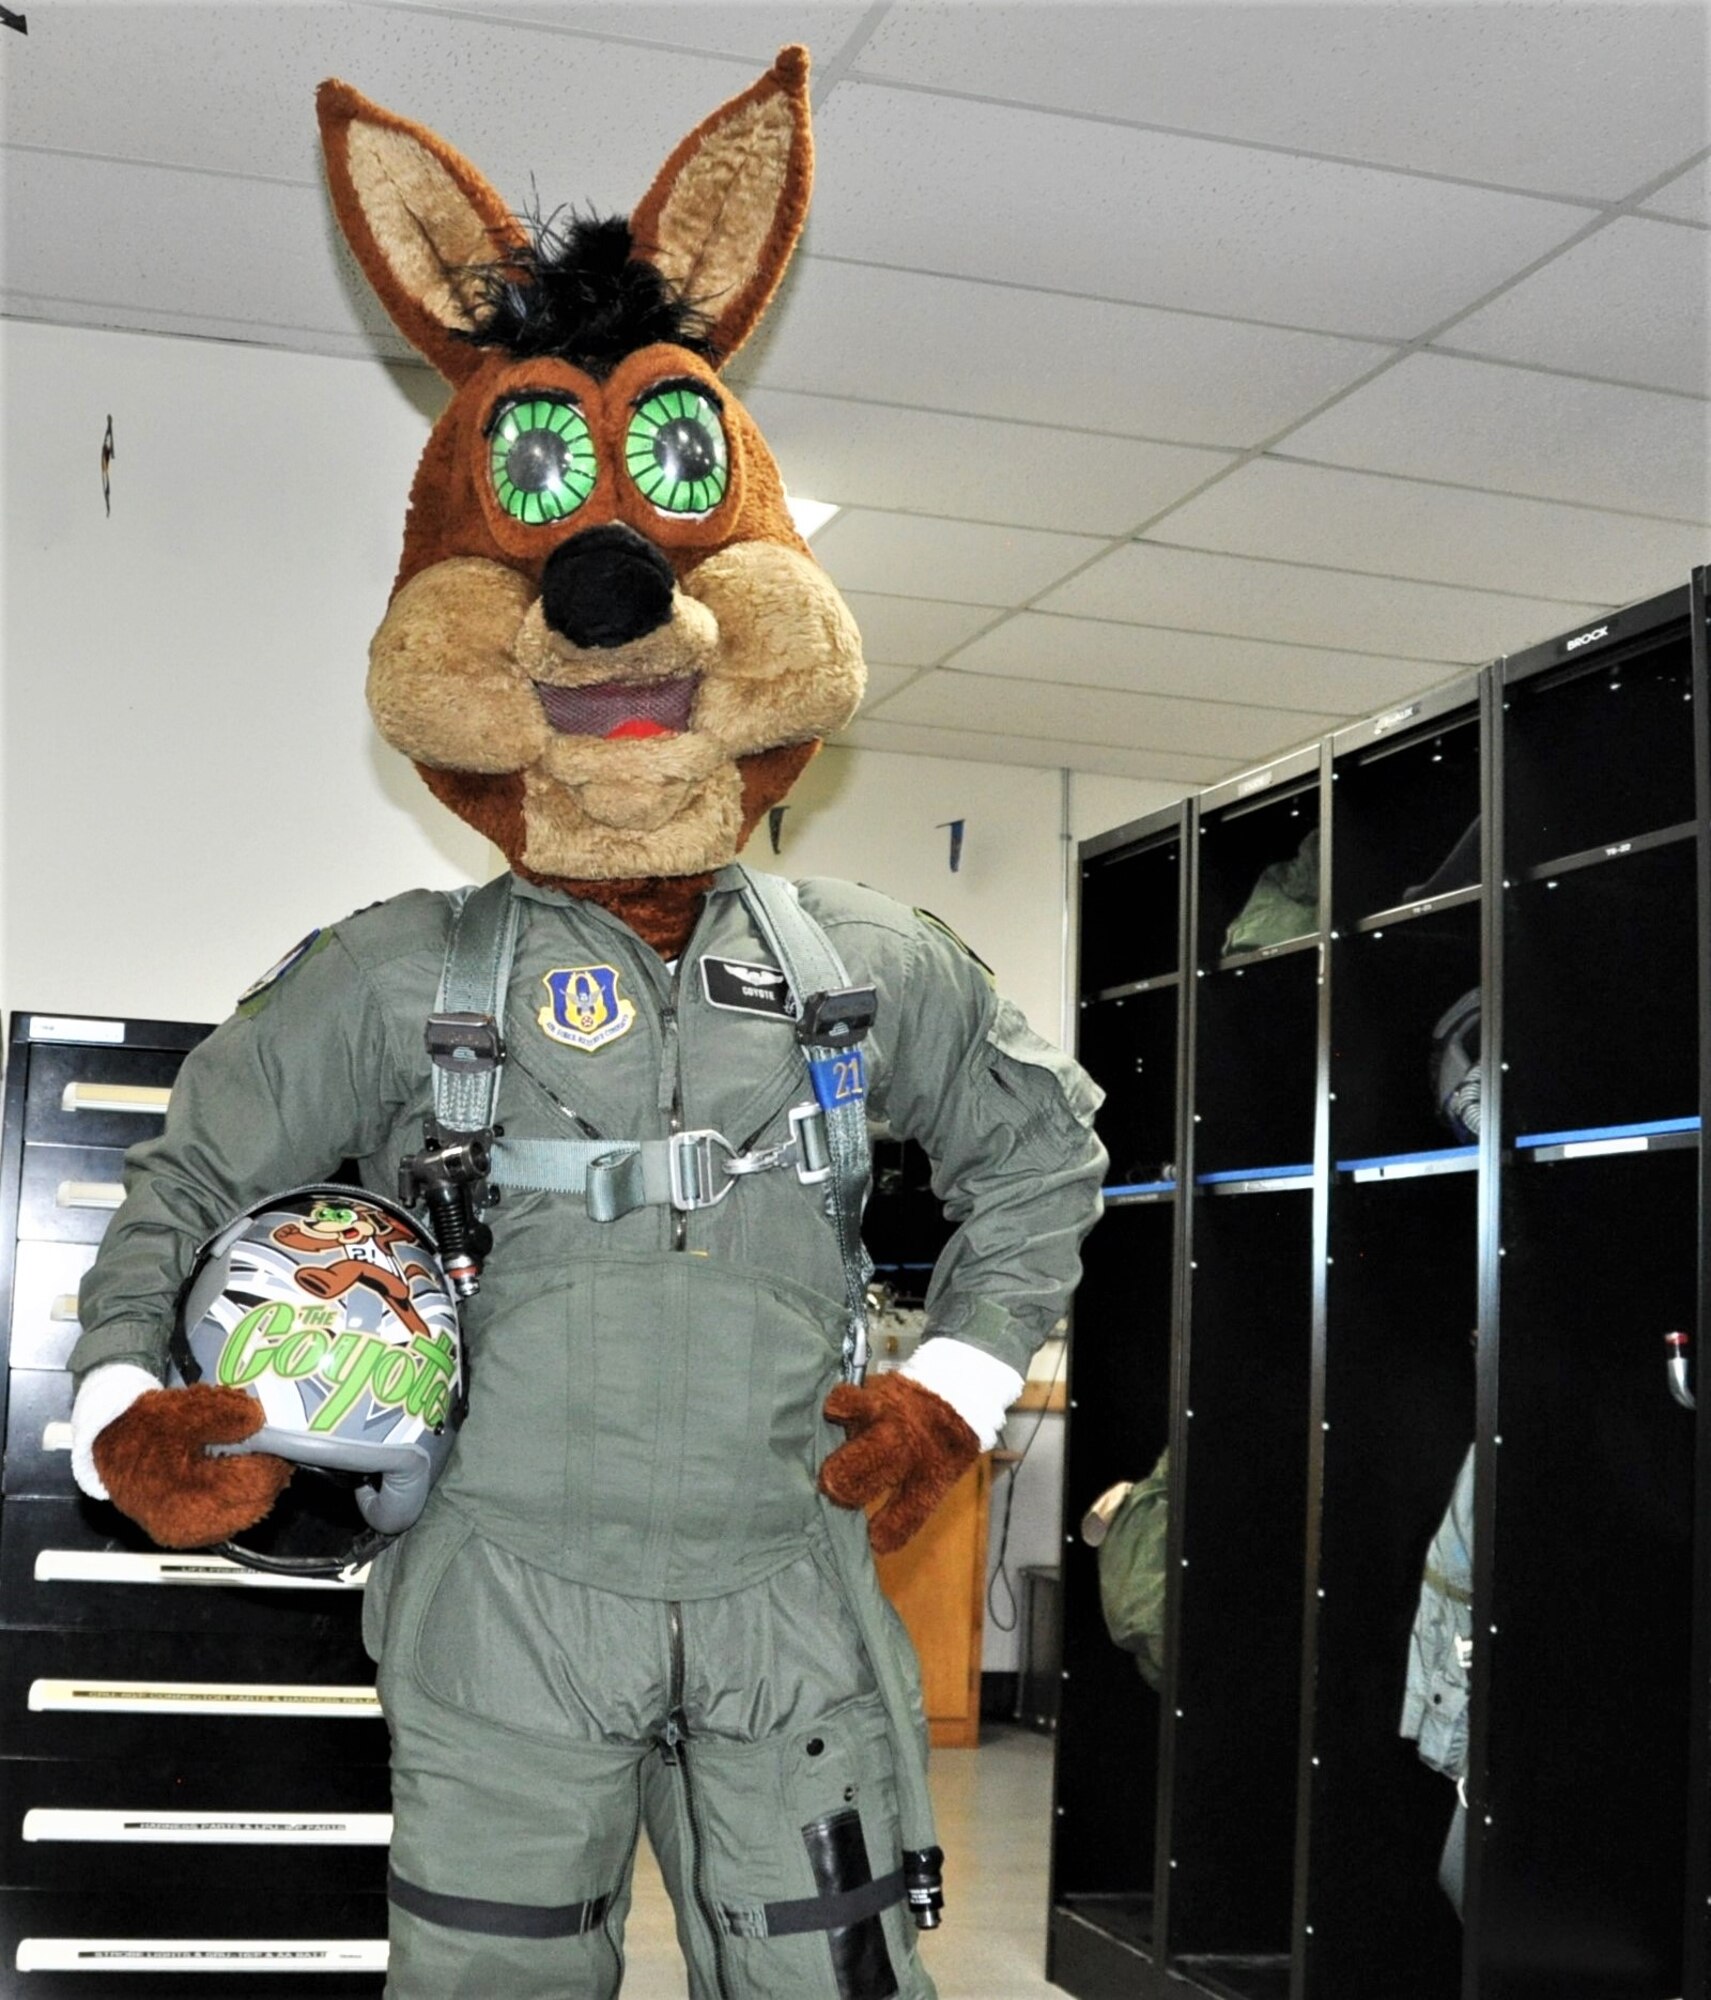 The Spurs Coyote poses with his customized helmet in the 559th Training Squadron locker room at Joint Base San Antonio-Randolph, Texas February 25 where Regular Air Force, Air Force Reserve, and civilian Airmen from the 340th Flying Training Group headquarters, 39th Flying Training Squadron T-6 Texan Flight, 12th Flying Training Wing Safety, 559th Flying Training Squadron T-6 team, and 3rd Combat Camera Squadron (JBSA-Lackland) members, and the NBA San Antonio Spurs production crew worked to put the Coyote through the pilot training process. Video footage will be used for a Spurs Military Appreciation video to be shown during the March 10 game.  (U.S. Air Force photo by Janis El Shabazz)